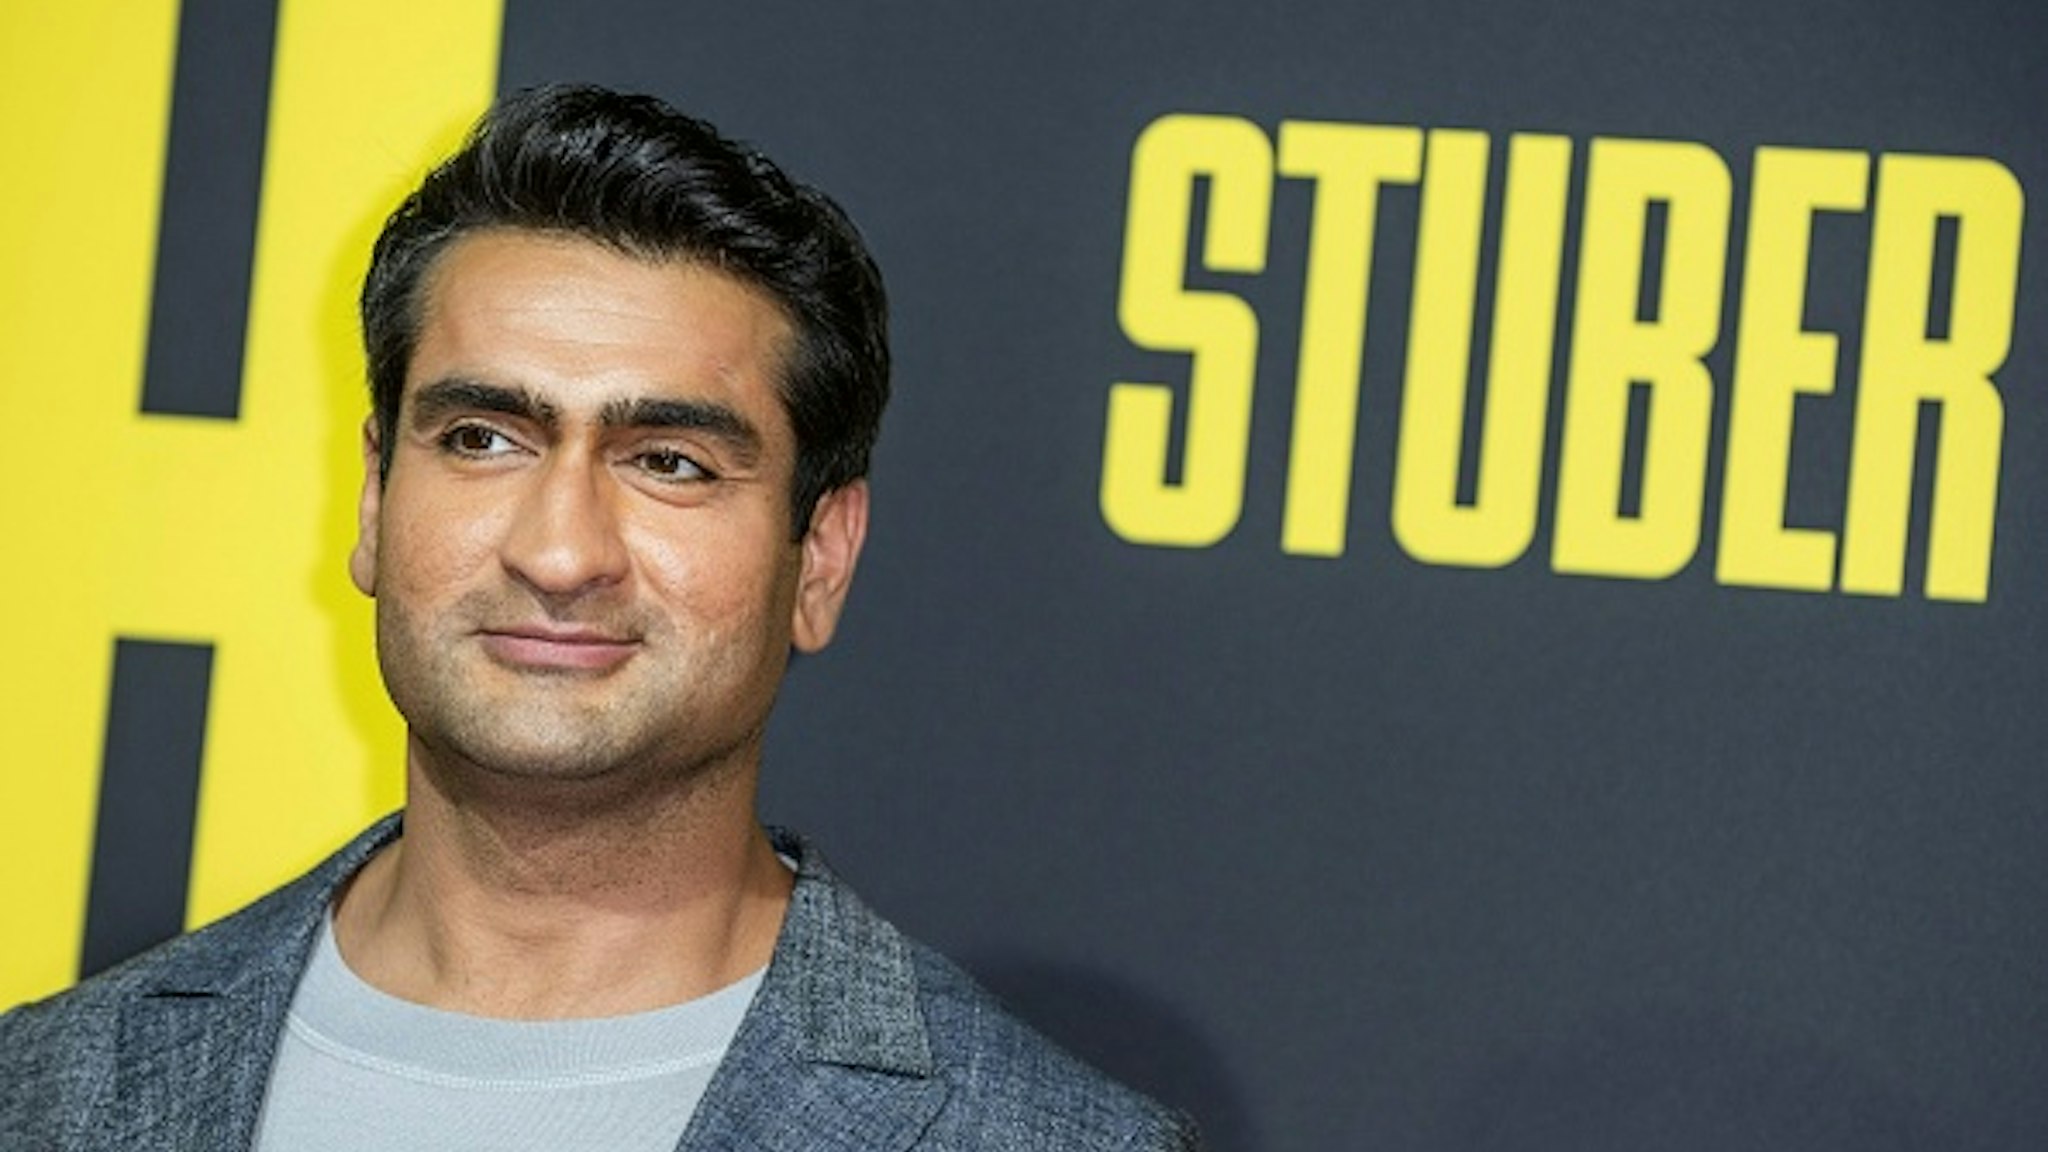 US/Pakistani actor Kumail Nanjiani arrives for the premiere of "Stuber" at Regal Cinemas LA Live on July 10, 2019 in Los Angeles.